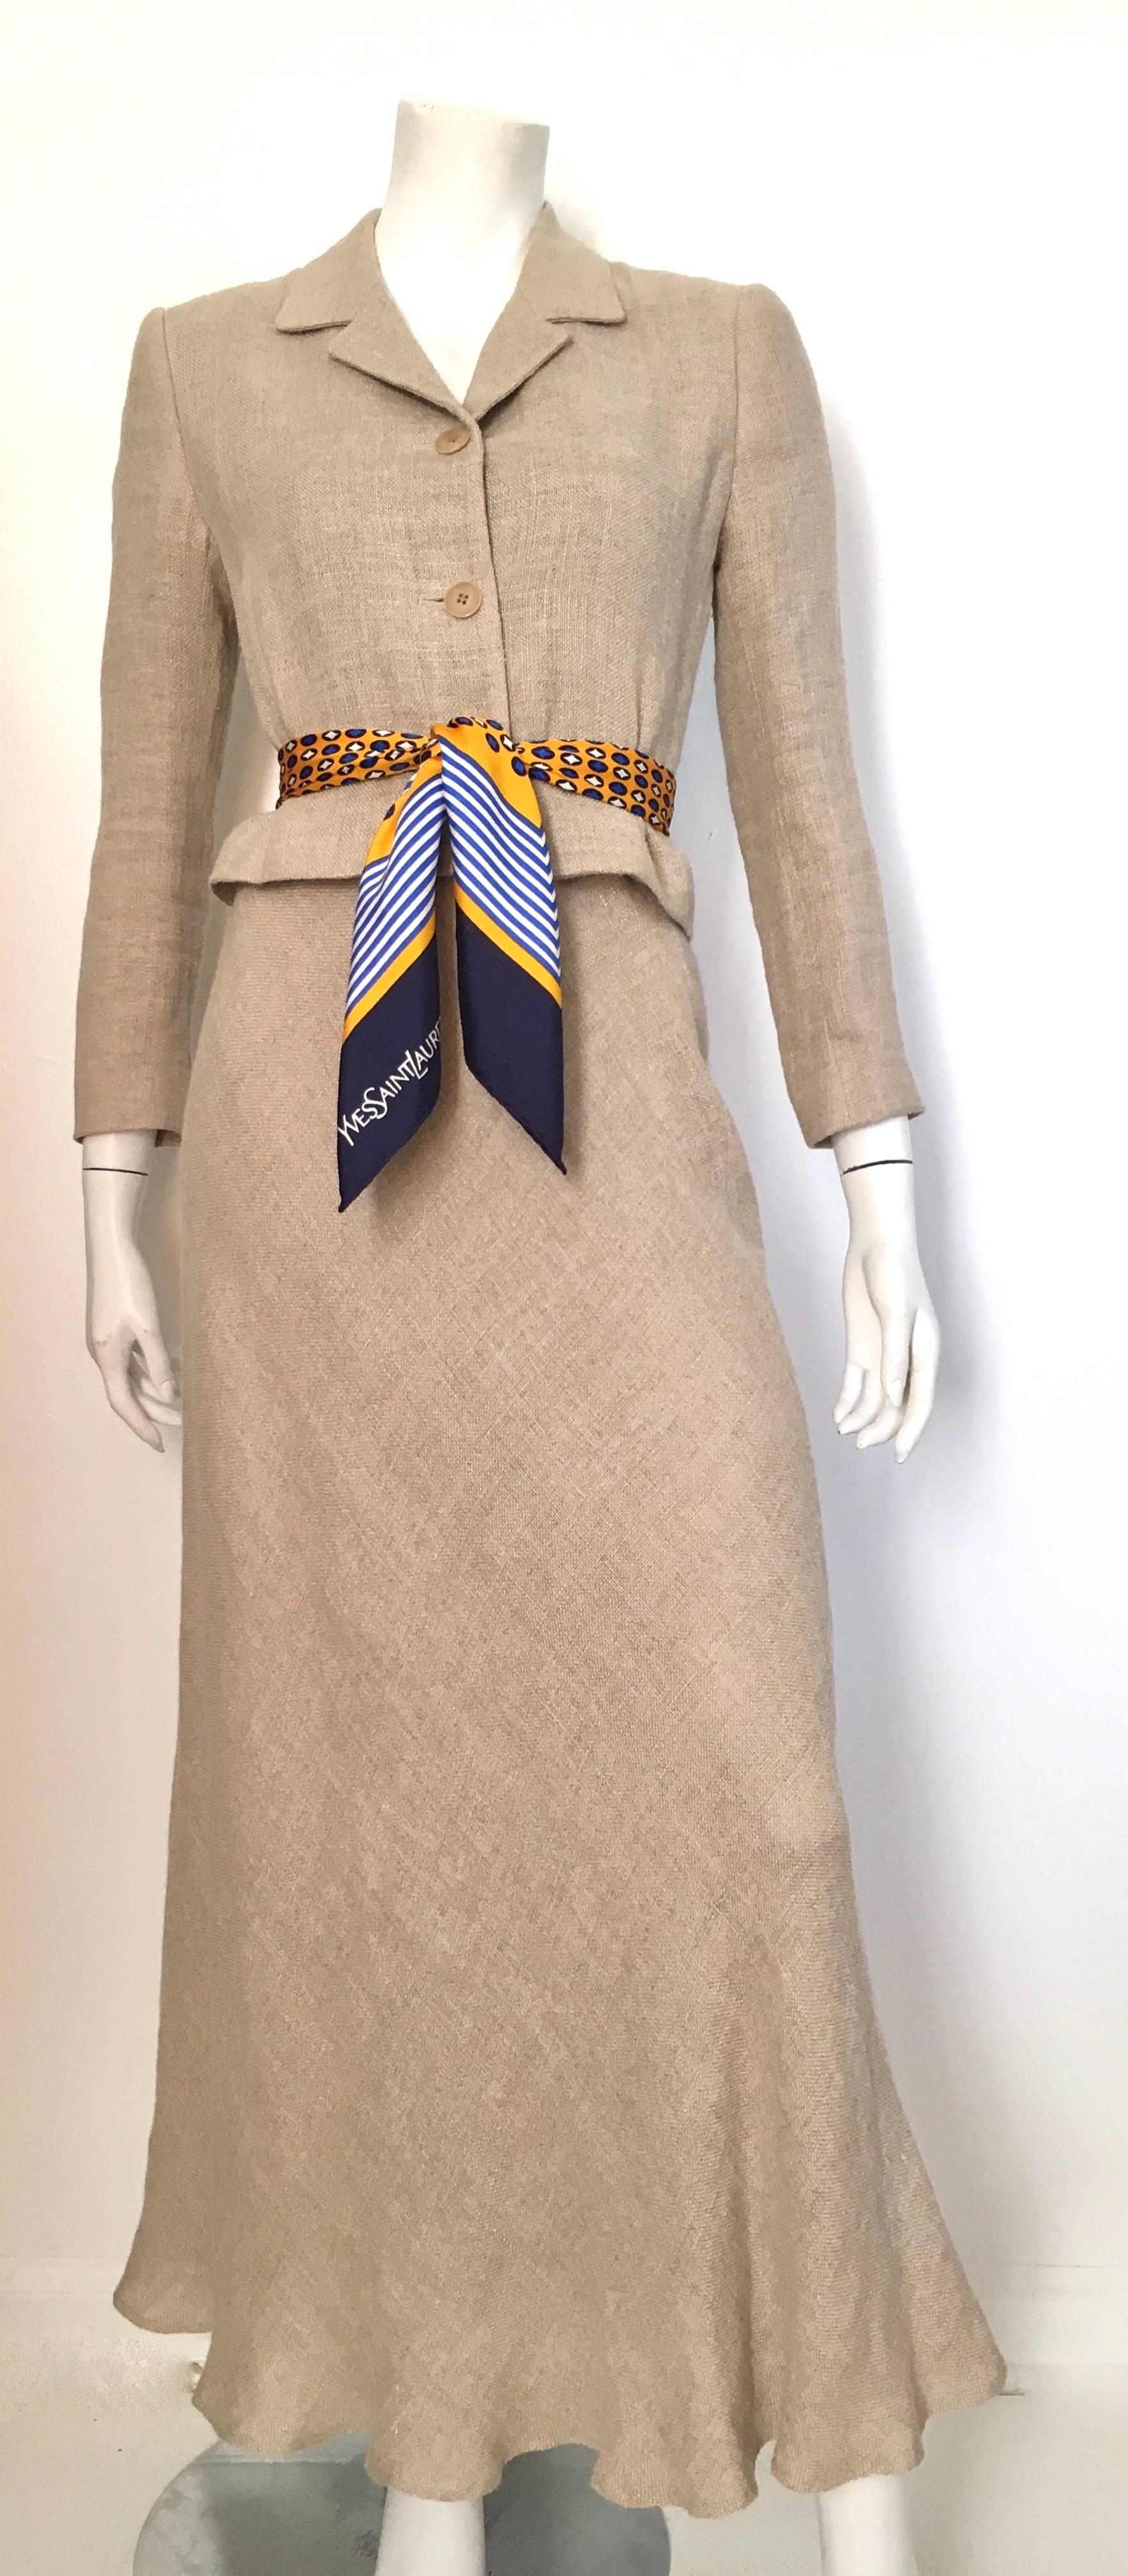 Ralph Lauren Purple Label Collection khaki linen long sleeve cropped jacket & long skirt is a size 4. This skirt set fits Matilda the Mannequin, who is a size 4, perfectly.  Ladies please grab your trusted friend, Mr. Tape Measure, so you can